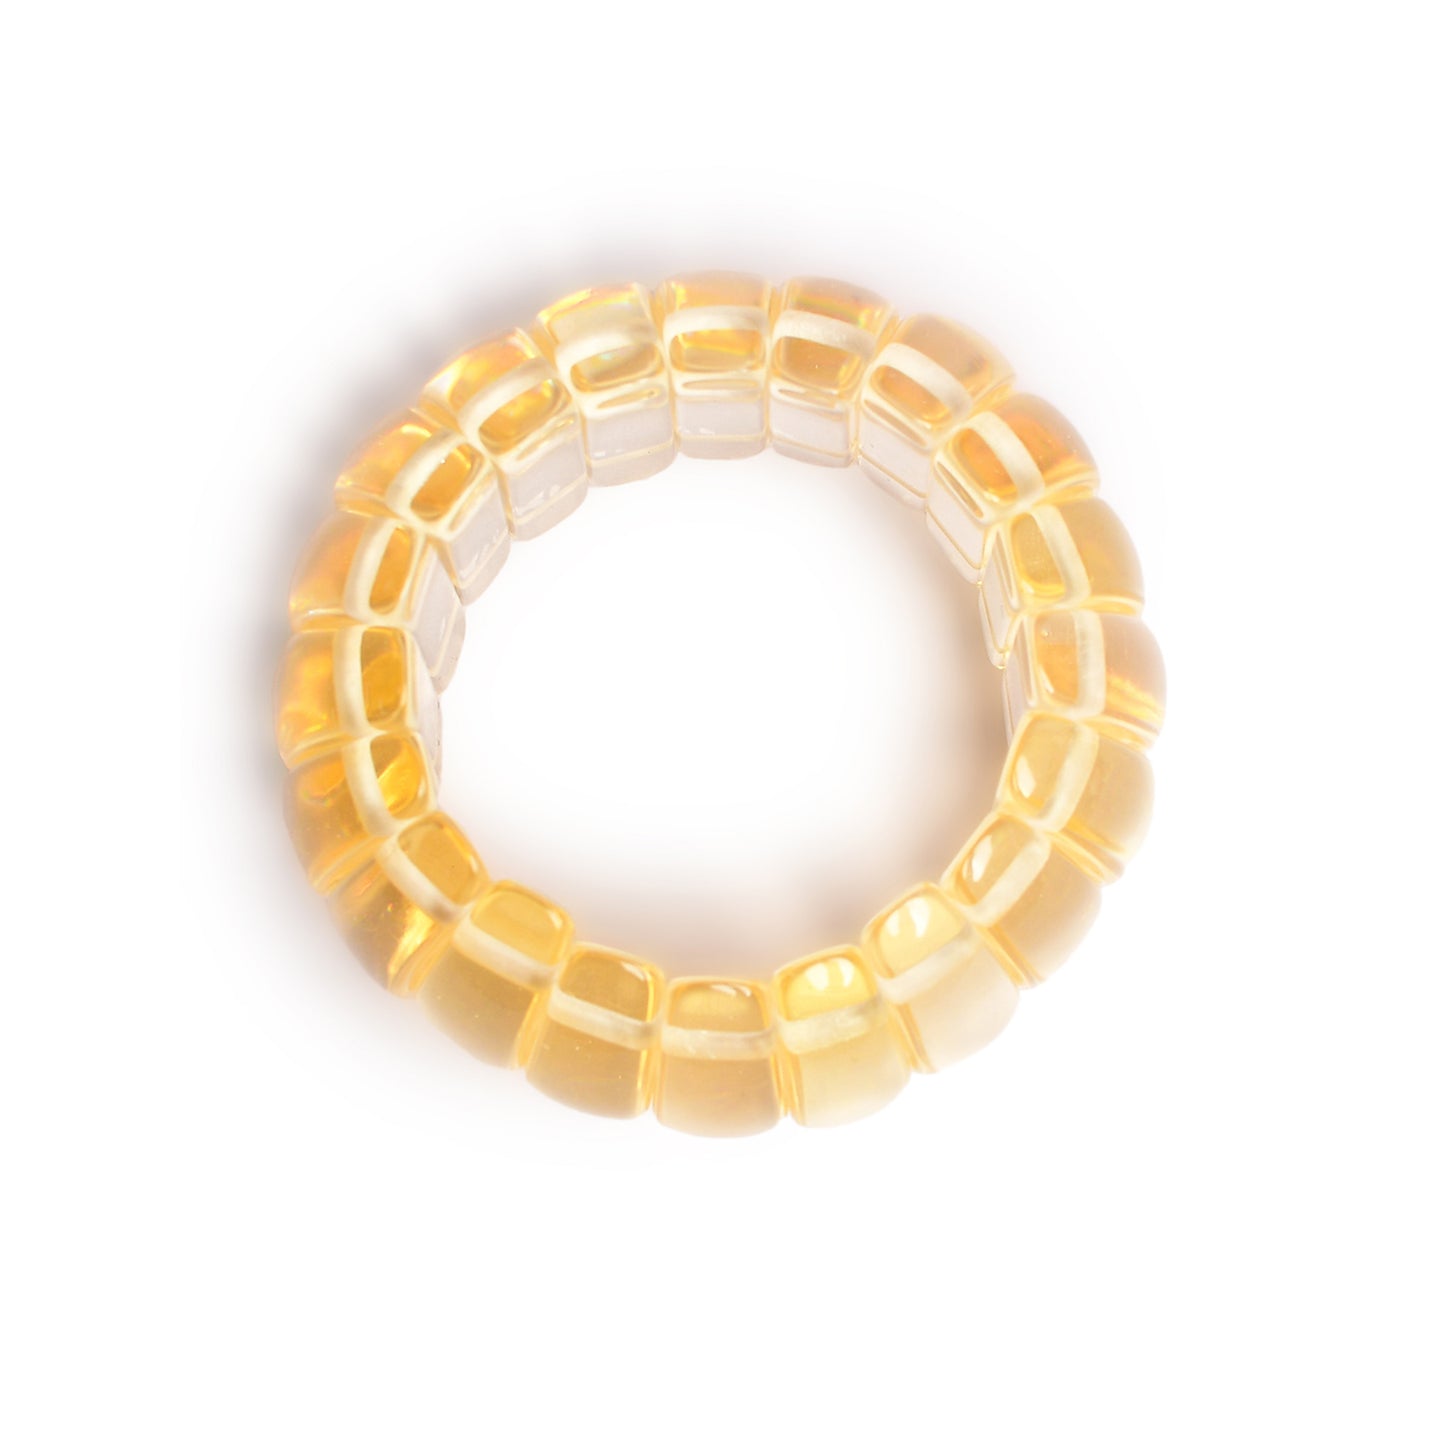 Transparent Beaded Stretchable Bracelet by Bamboo Tree Jewels